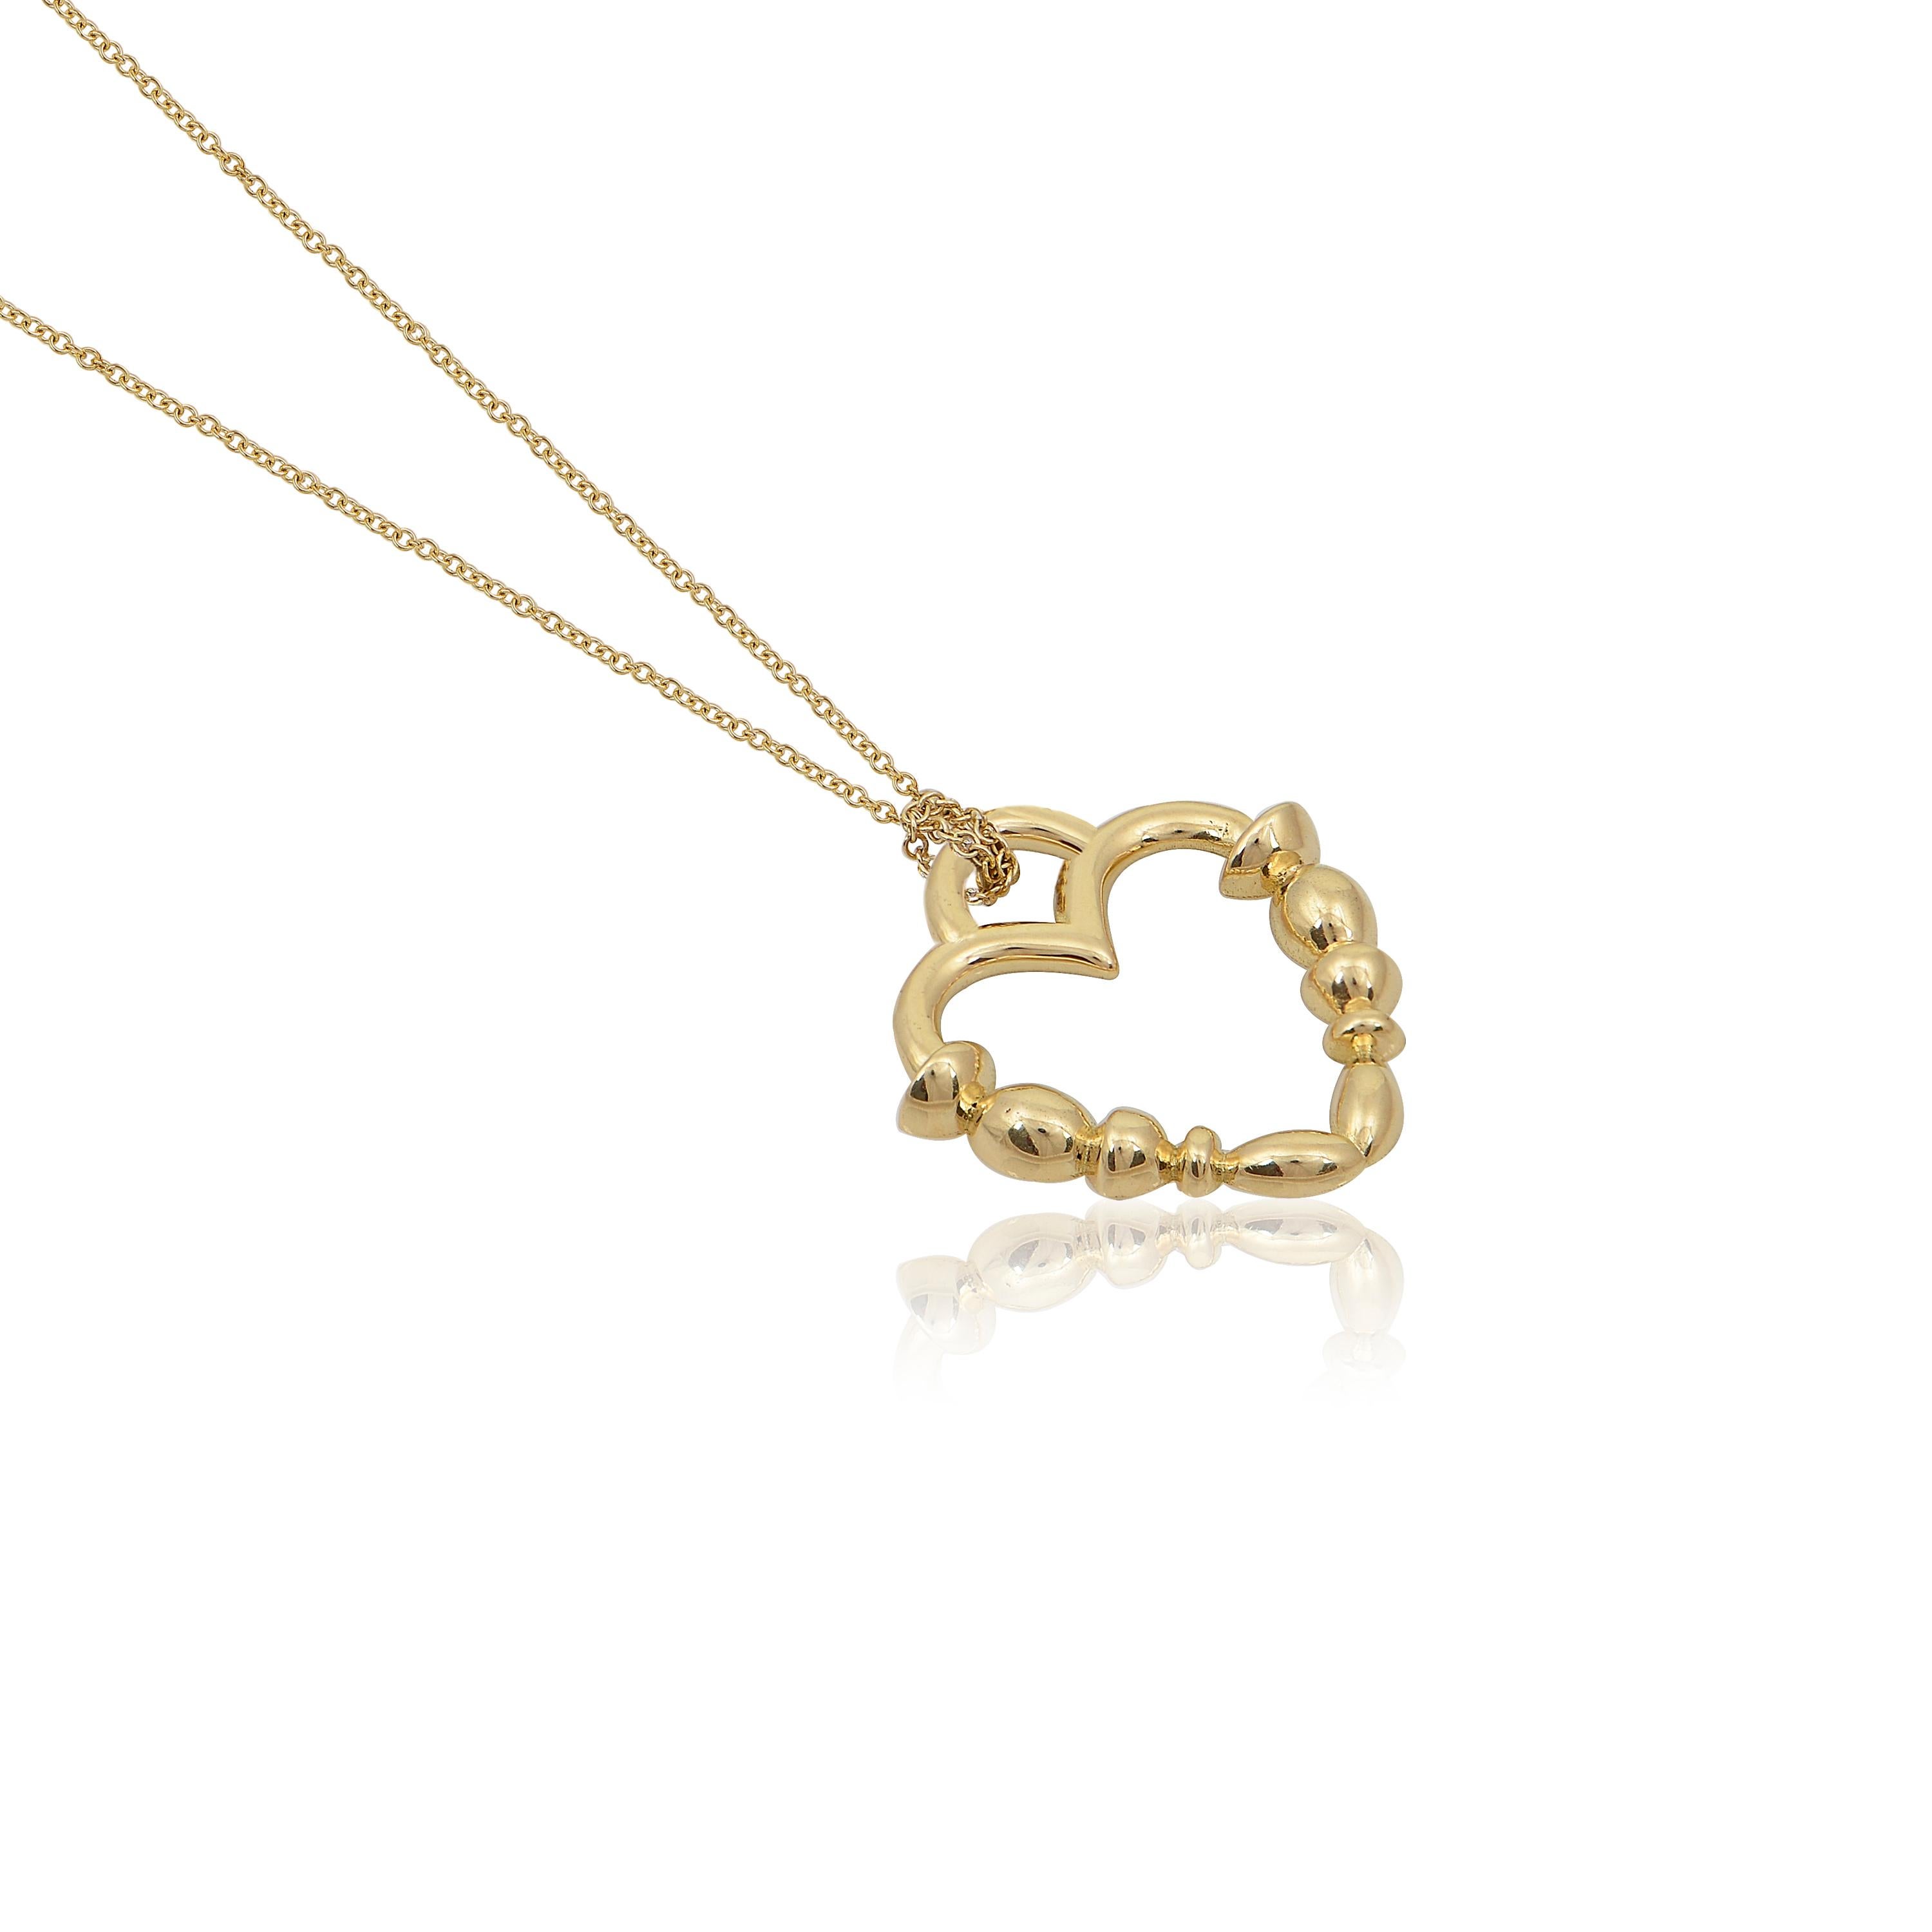 Designer: Alexia Gryllaki

Dimensions: motif 19x19mm, chain 500mm
Weight: approximately 4.3g 
Barcode: NEX3006


Totem heart pendant in 18 karat yellow gold with a 450mm chain that can be transformed into an earring, by hanging it through a gold